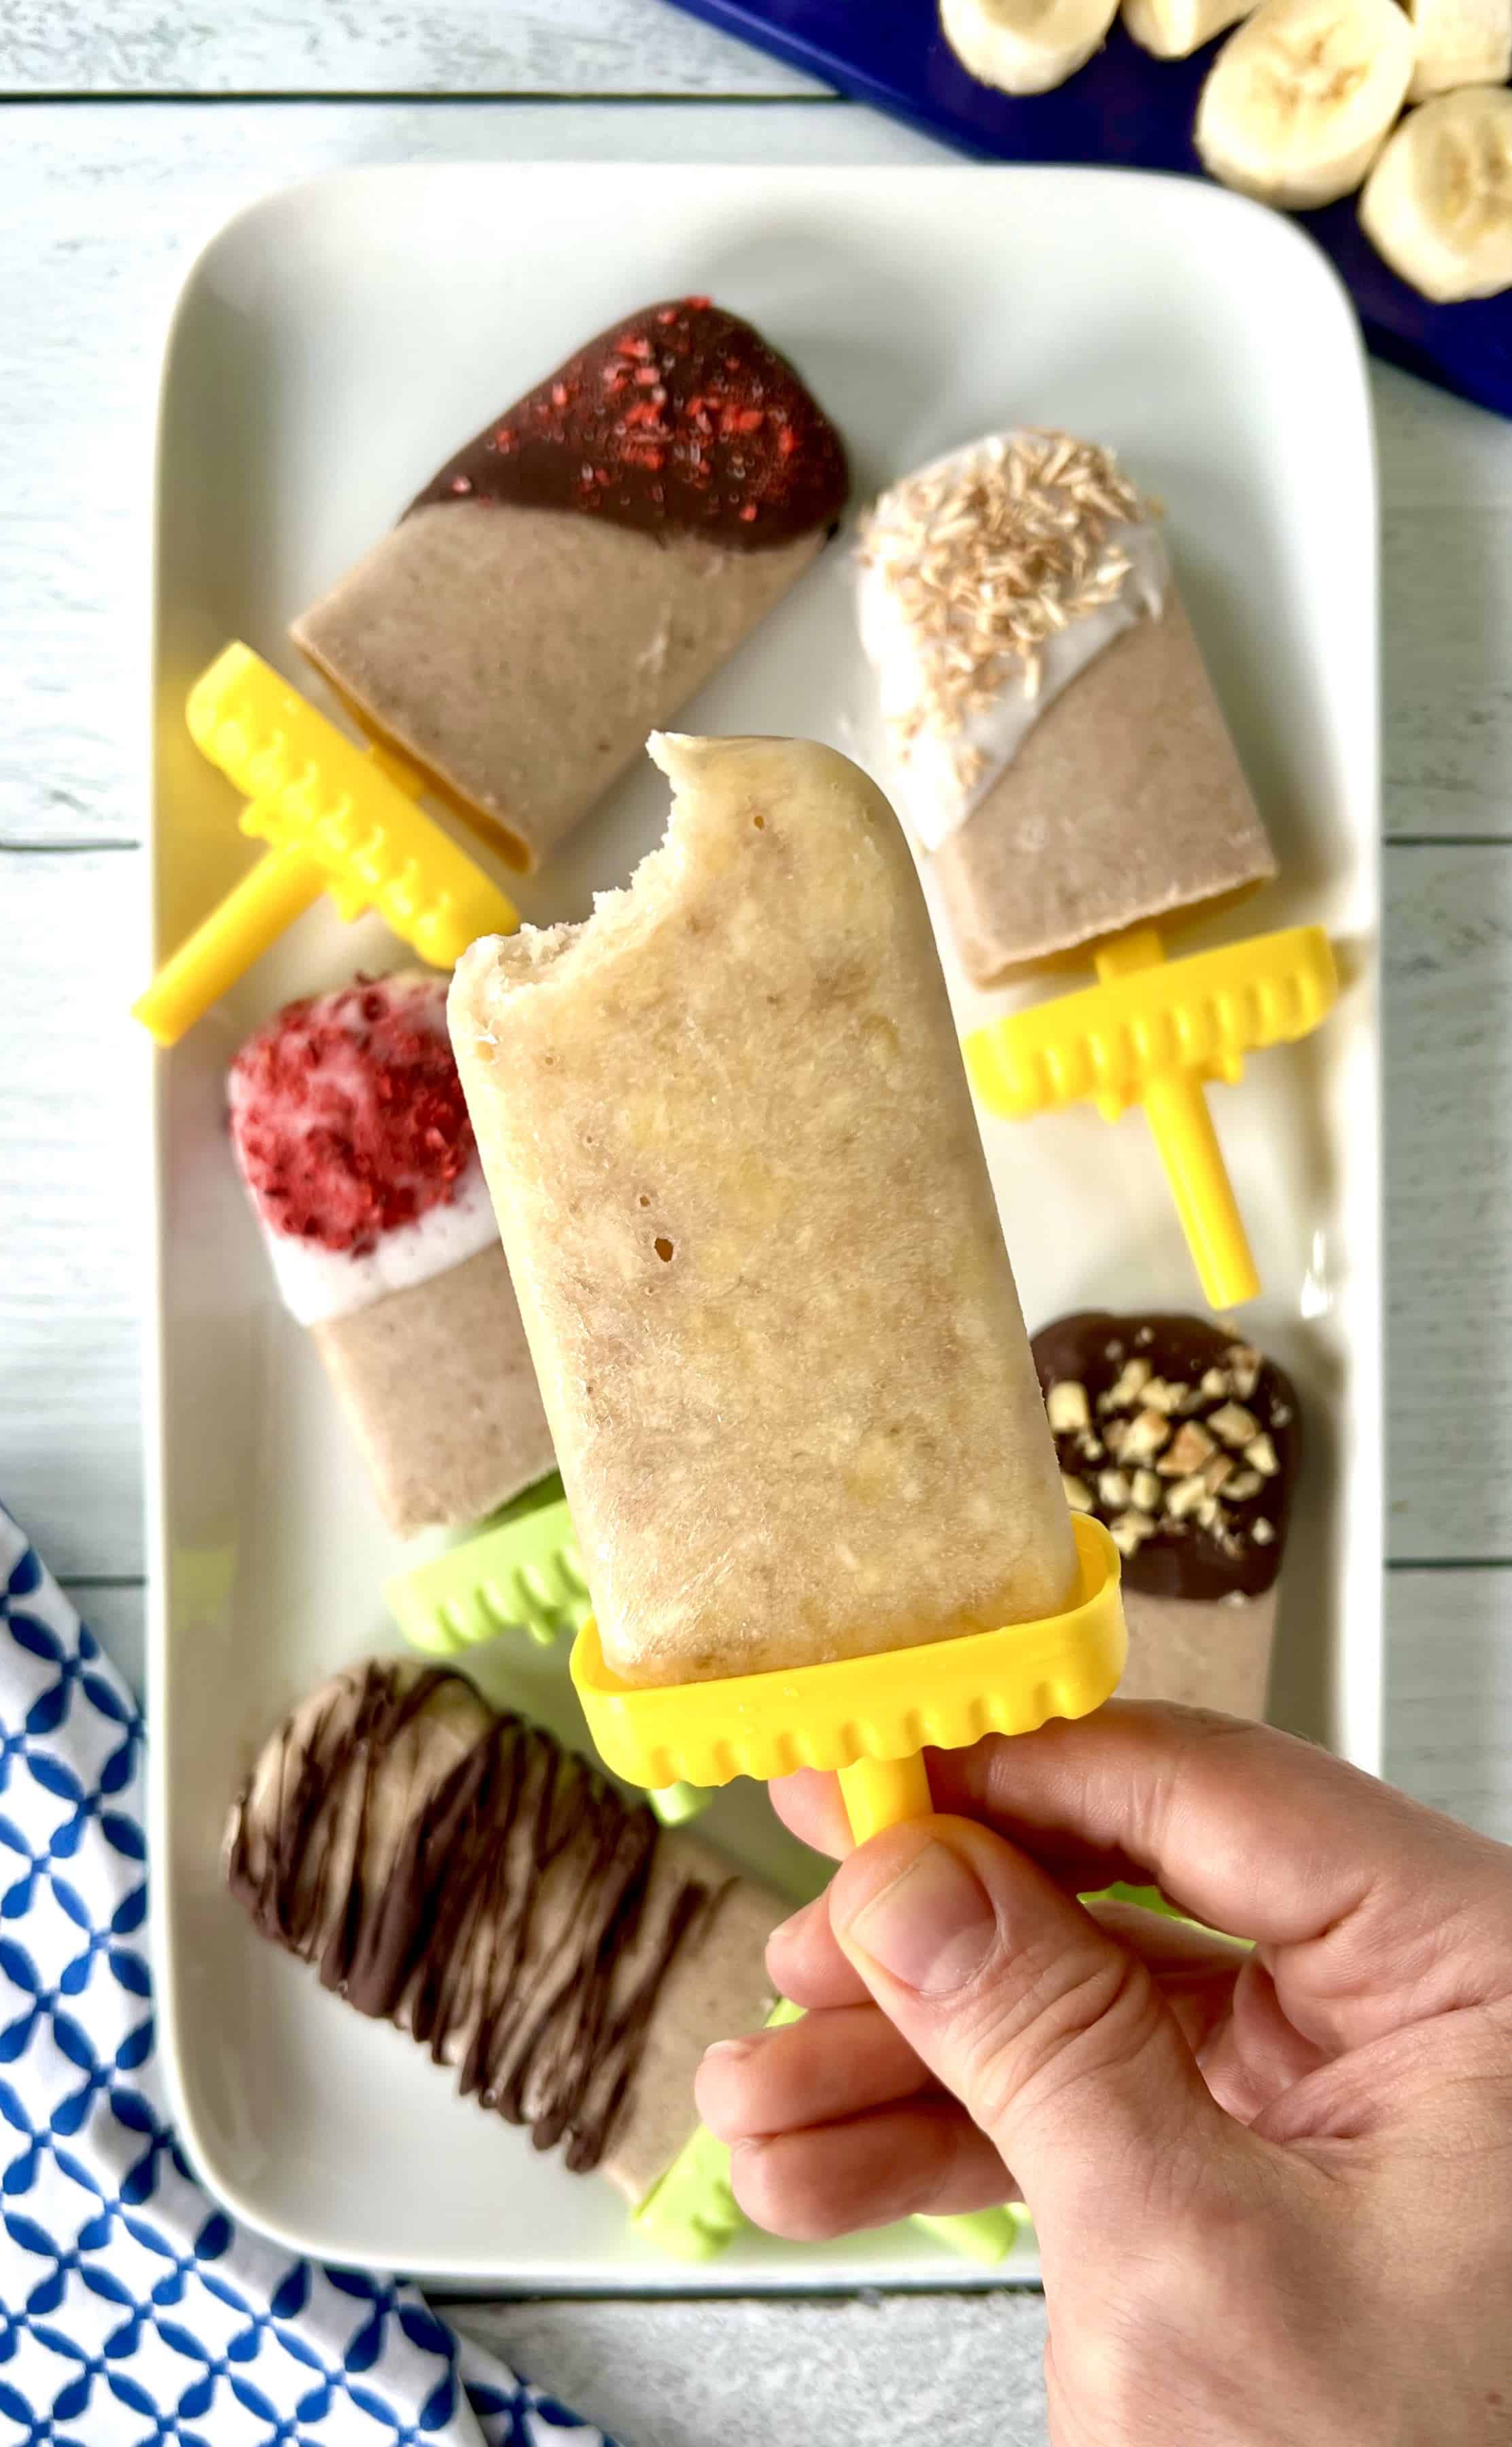 Homemade frozen popsicles on a white platter, some dipped in chocolate, some in yogurt, all with different toppings, and a hand holding a plain one above the others.